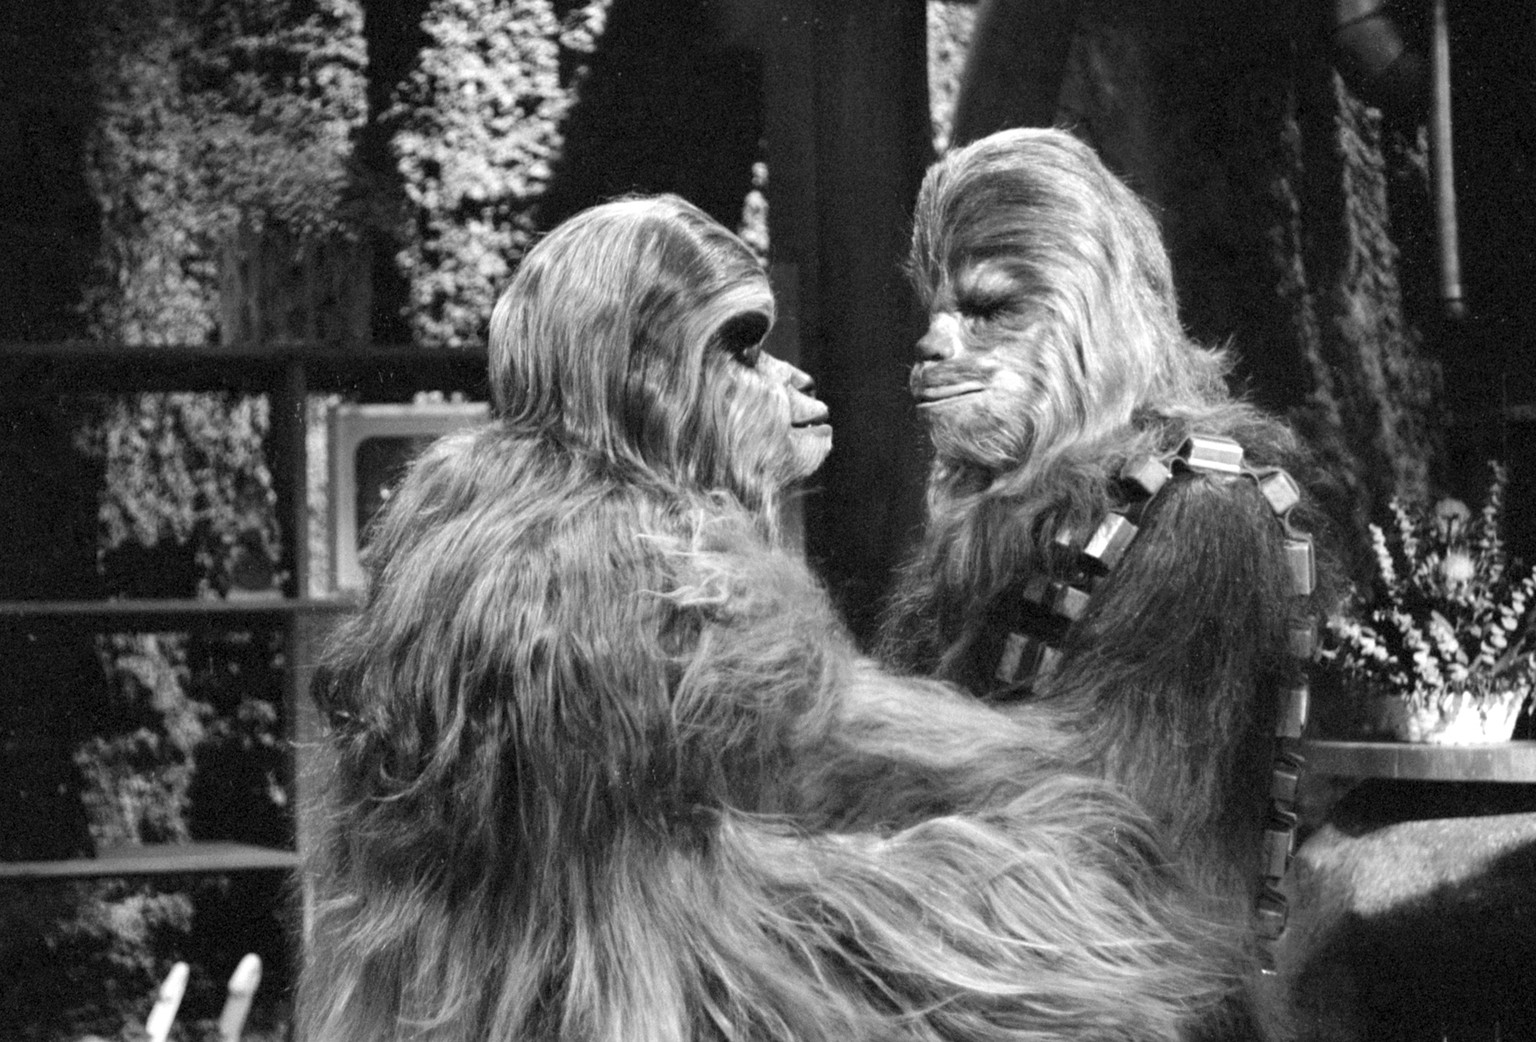 The Star Wars Holiday Special
LOS ANGELES - AUGUST 23: THE STAR WARS HOLIDAY SPECIAL. Mickey Morton (as Malla) and Peter Mayhew (as Chewbacca). Image dated August 23, 1978. (Photo by CBS via Getty Ima ...